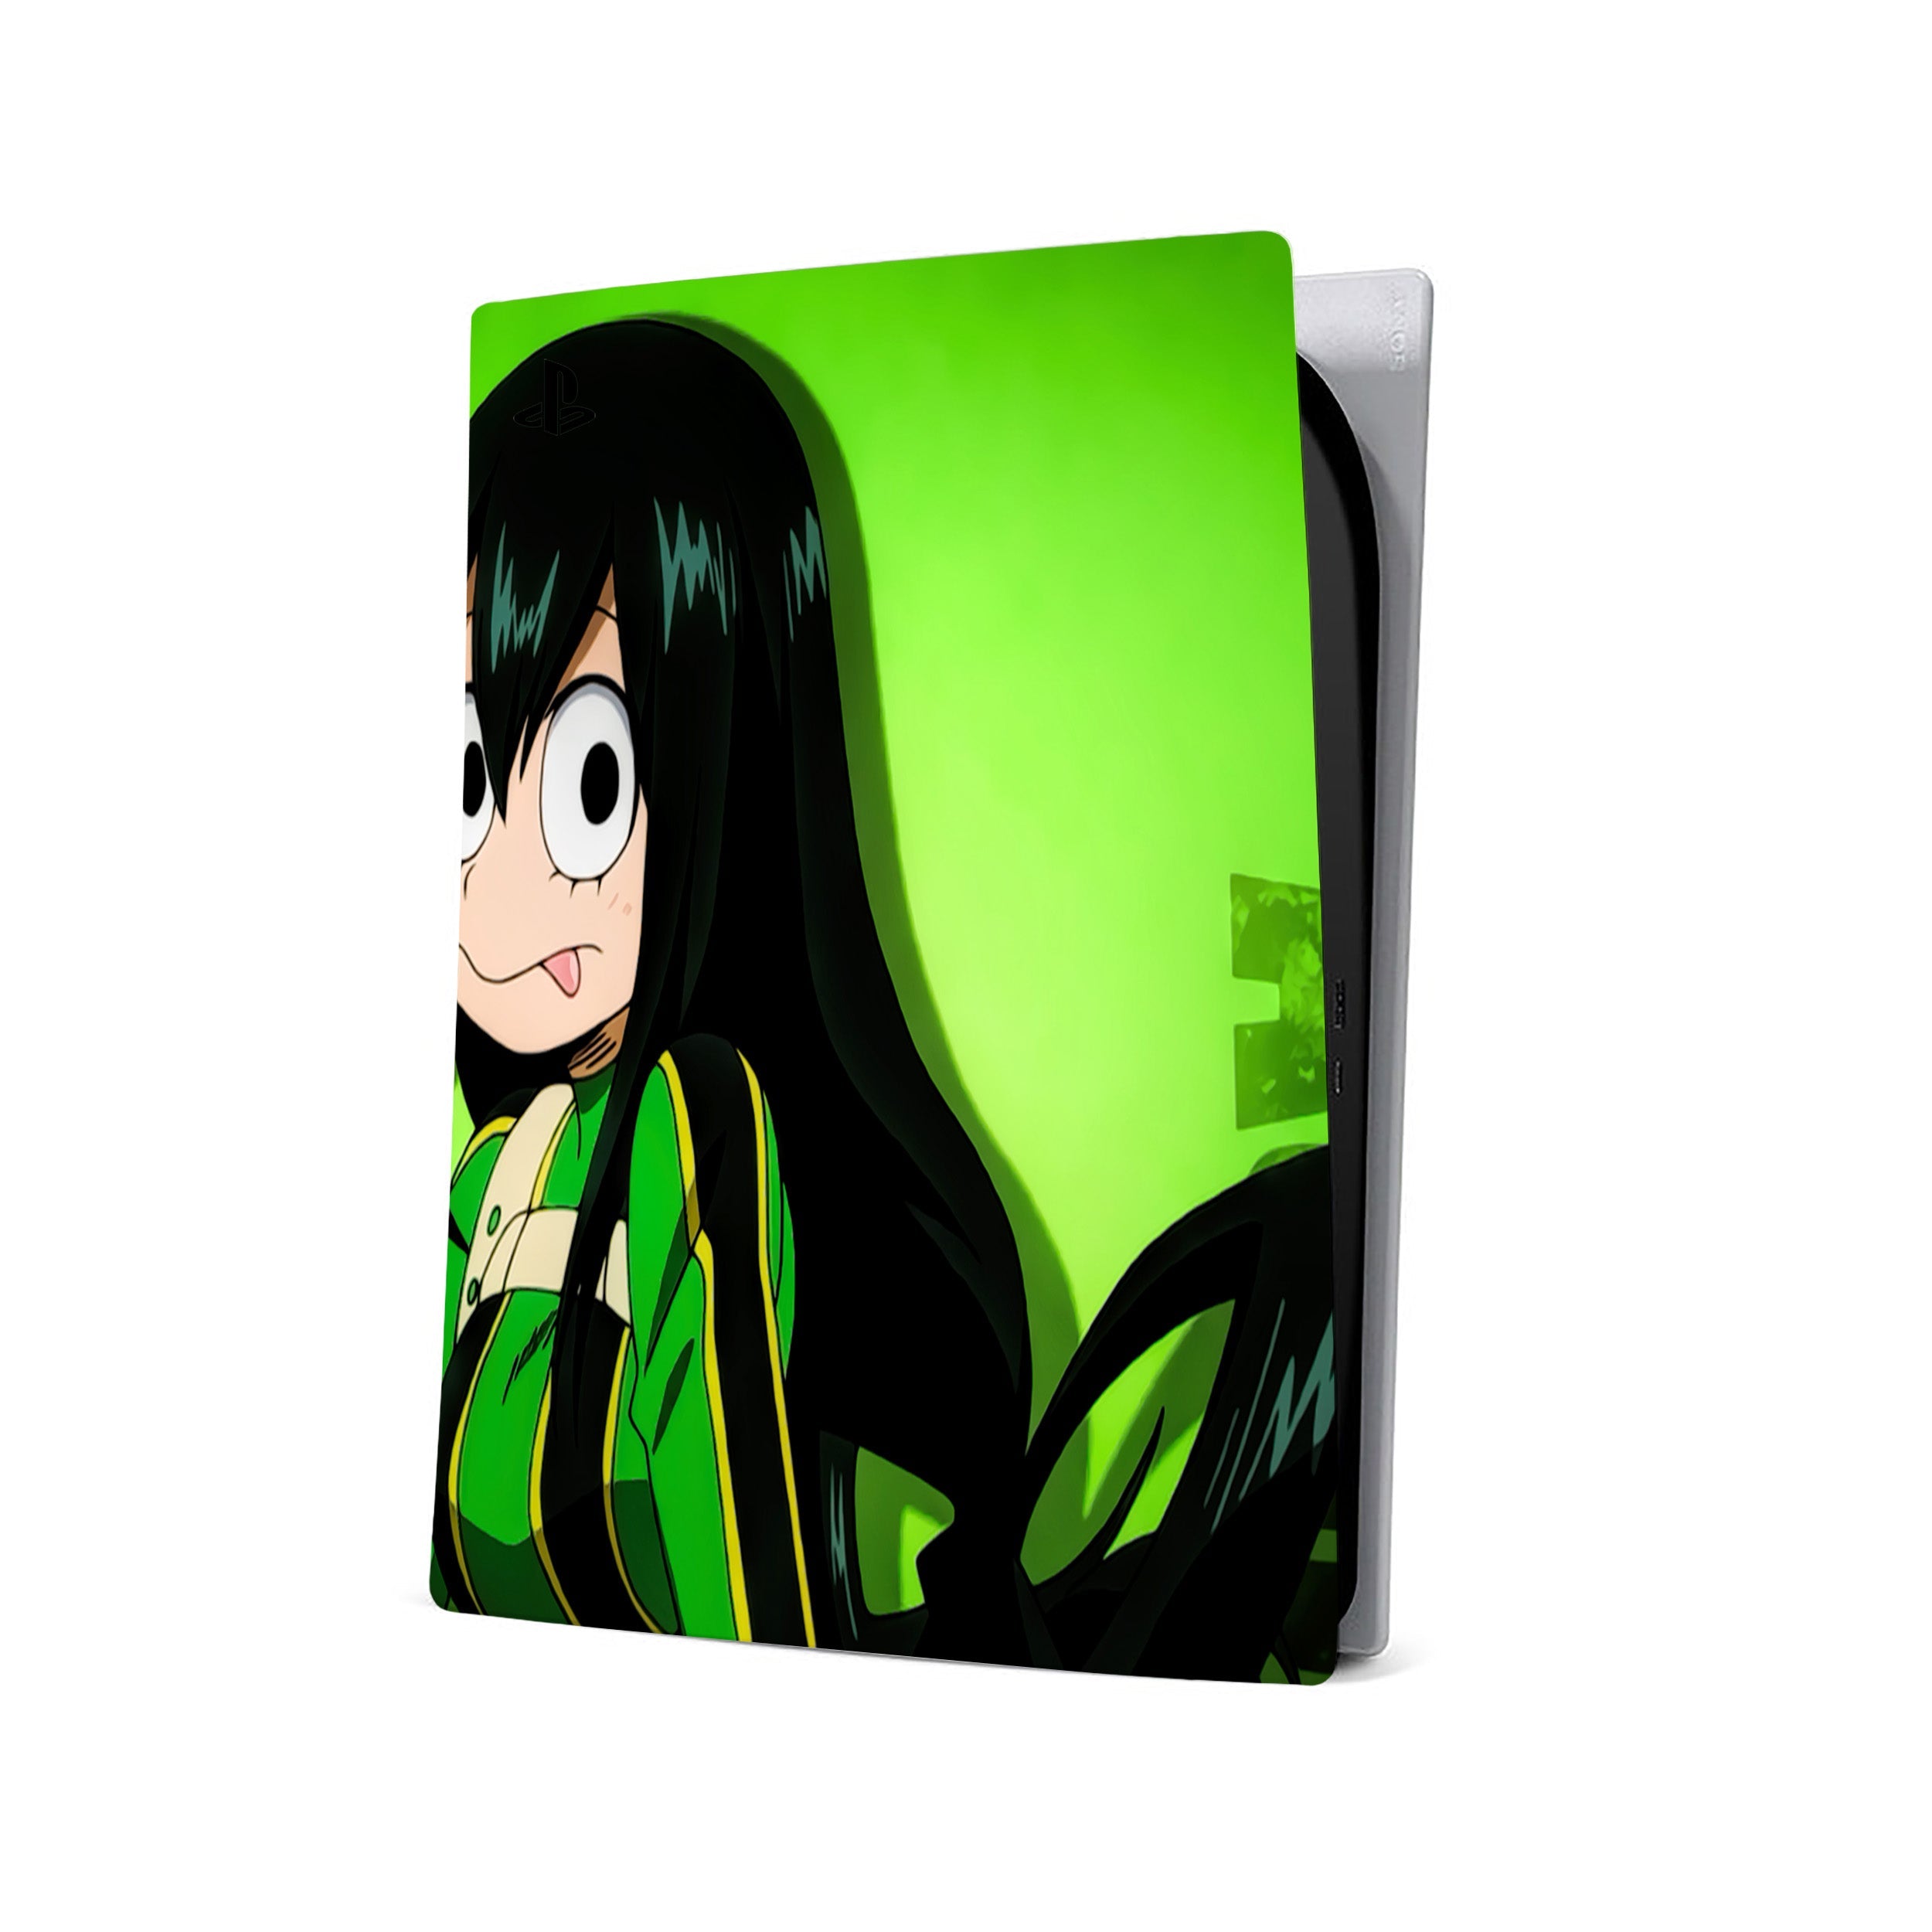 A video game skin featuring a My Hero Academia Tsuyu Asui design for the PS5.